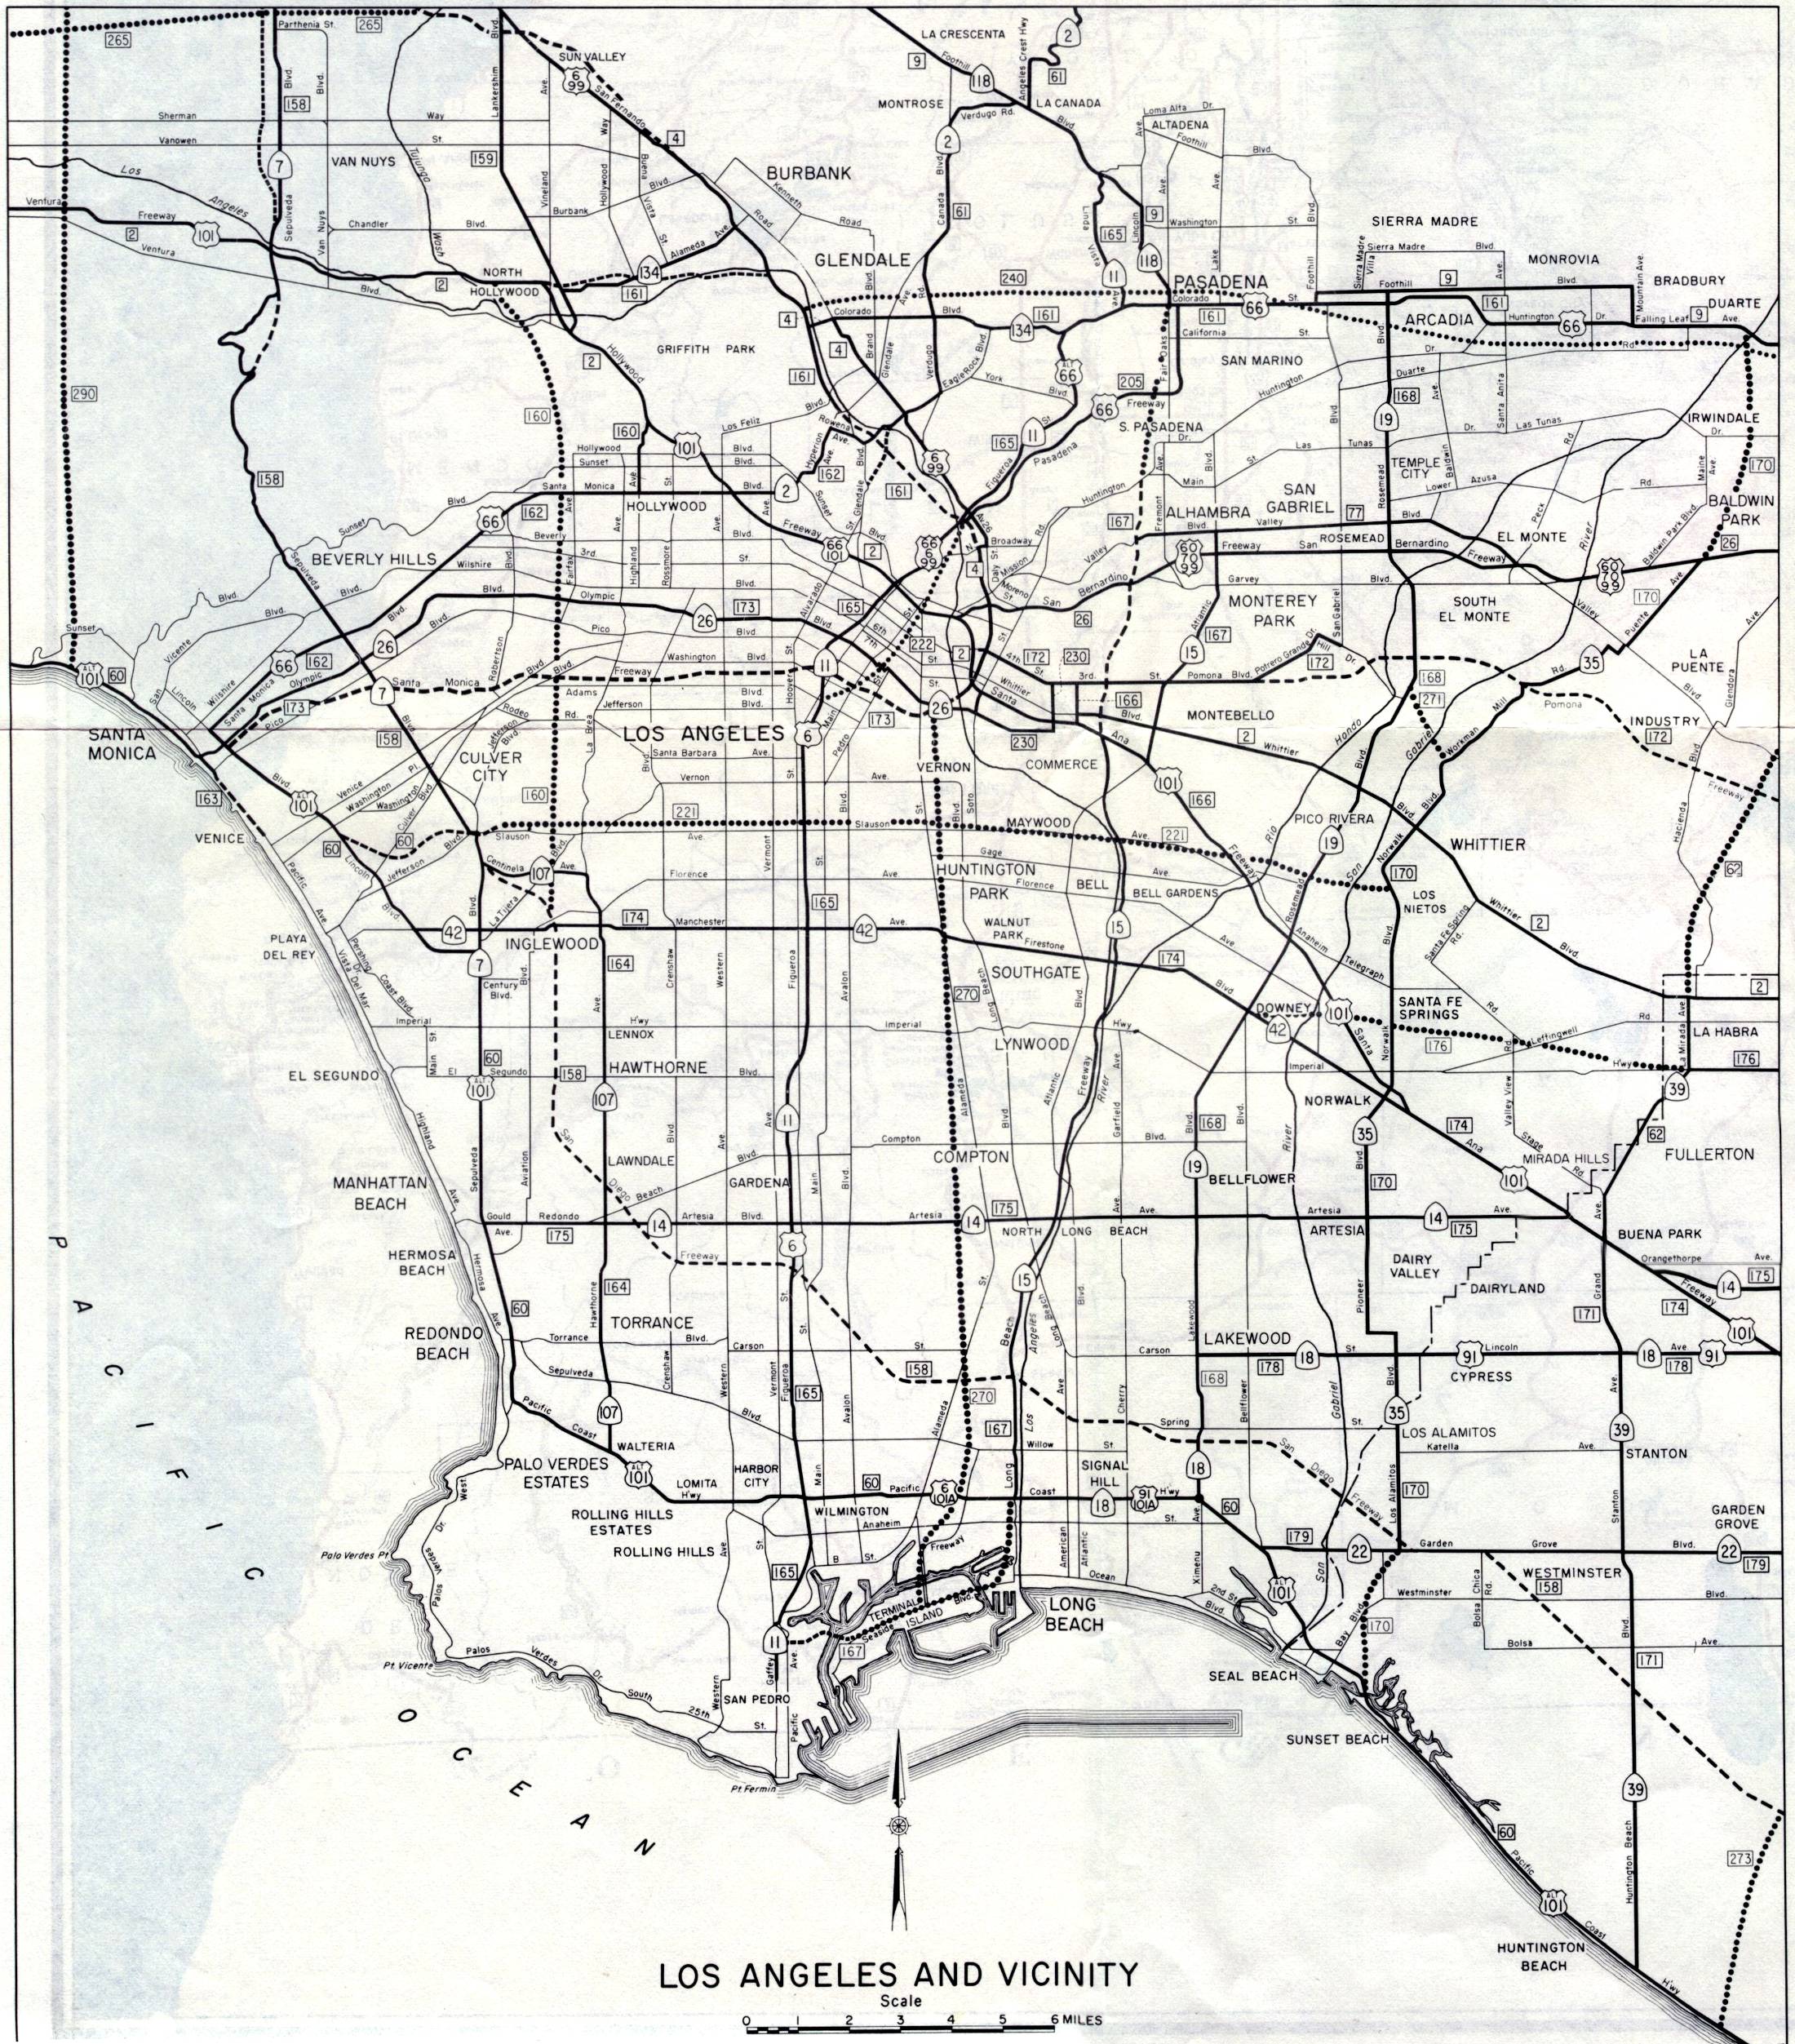 Detail map for Los Angeles and vicinity on the 1961 California official highway map